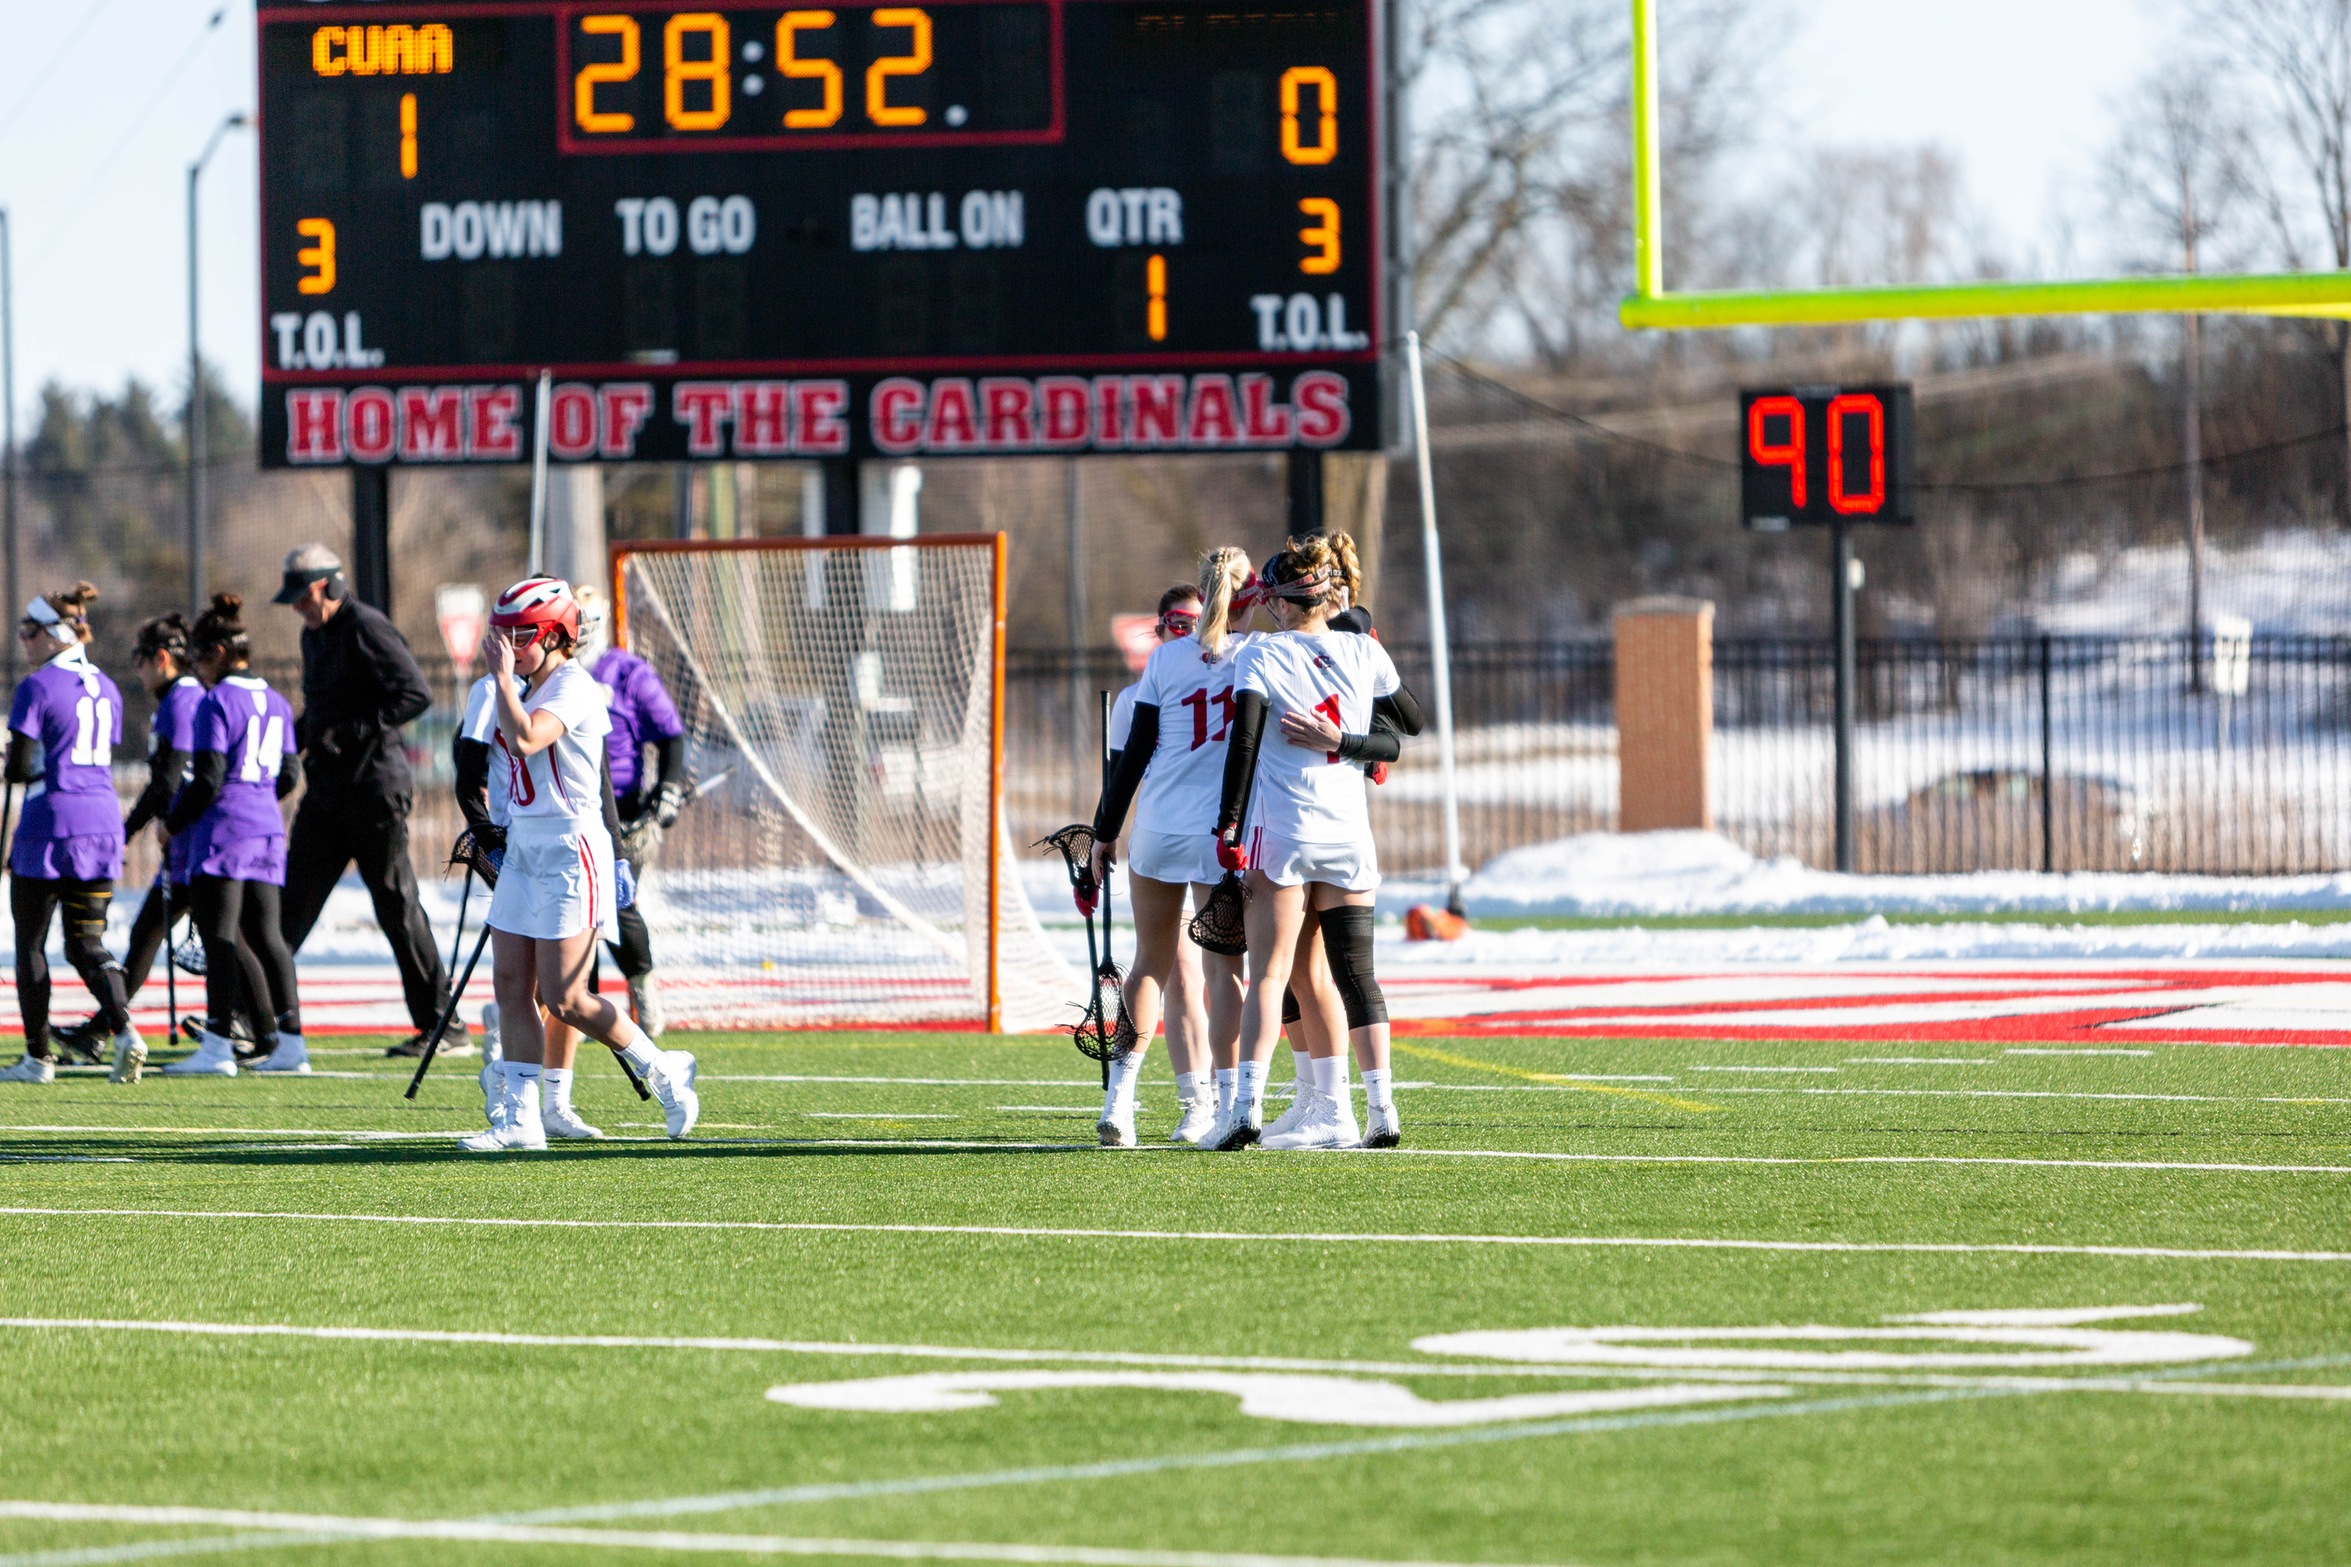 Season Preview: Women's Lacrosse looks to build off of strong 2020 season